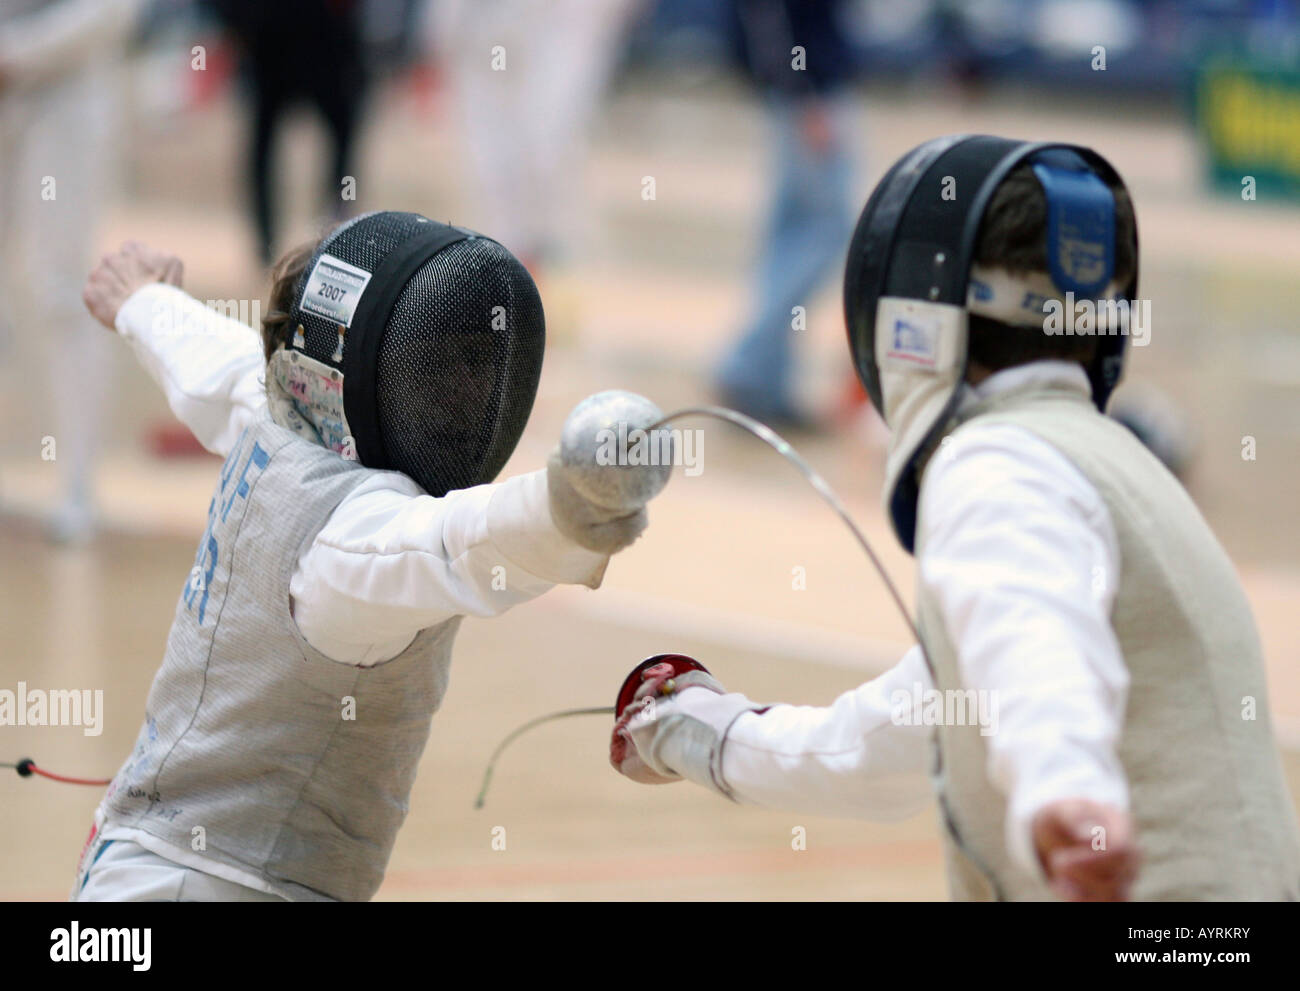 Foilsman Leon Wolf attacking (fencing) Stock Photo